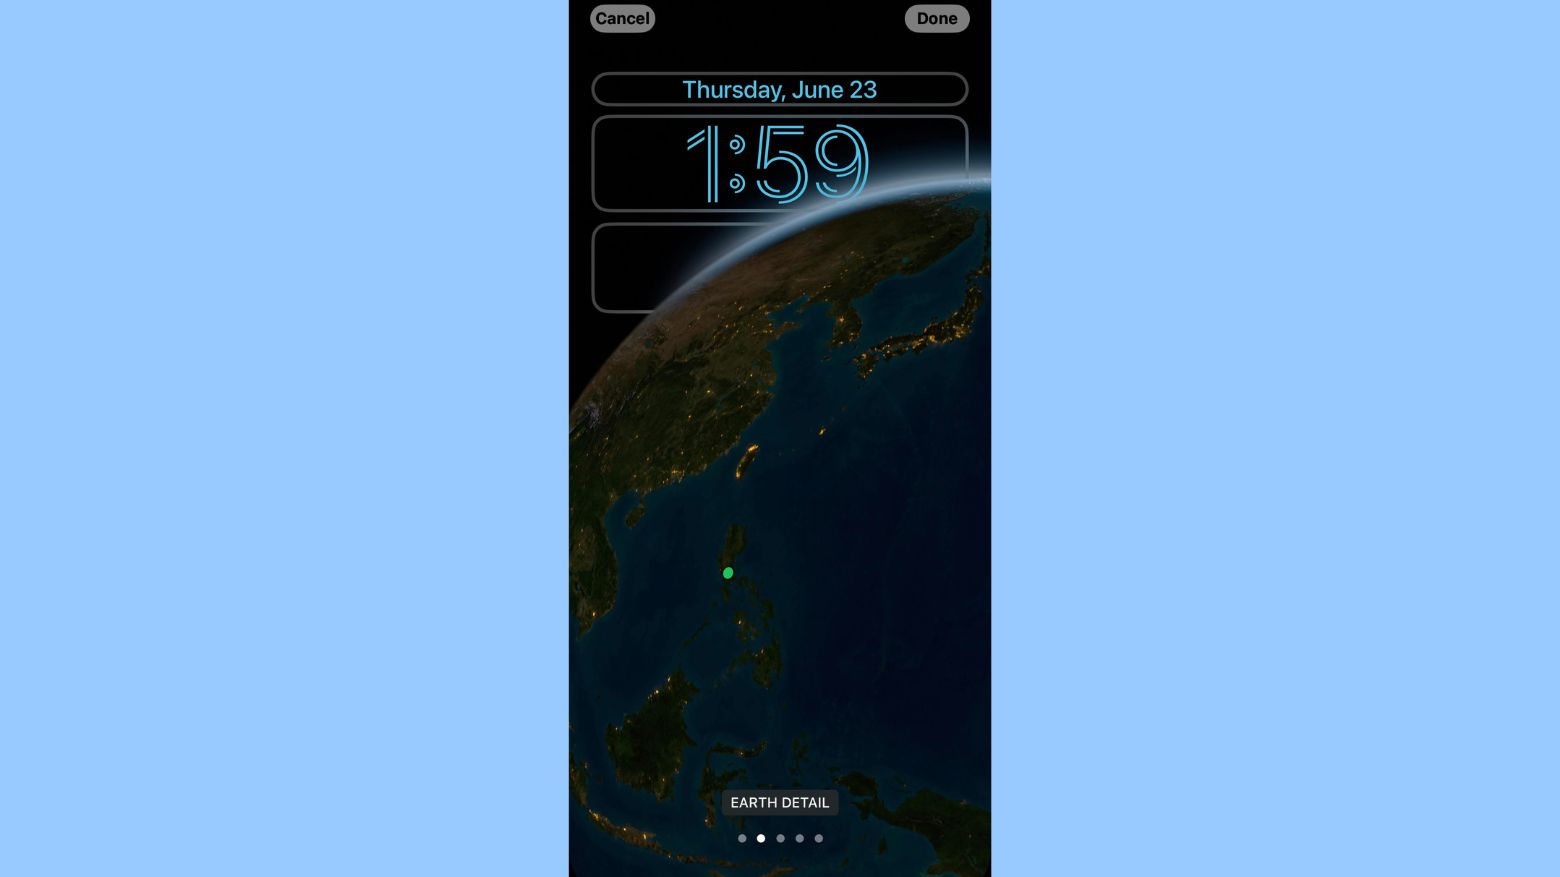 Astronomy wallpaper in iOS 16 will show your location as a green dot.